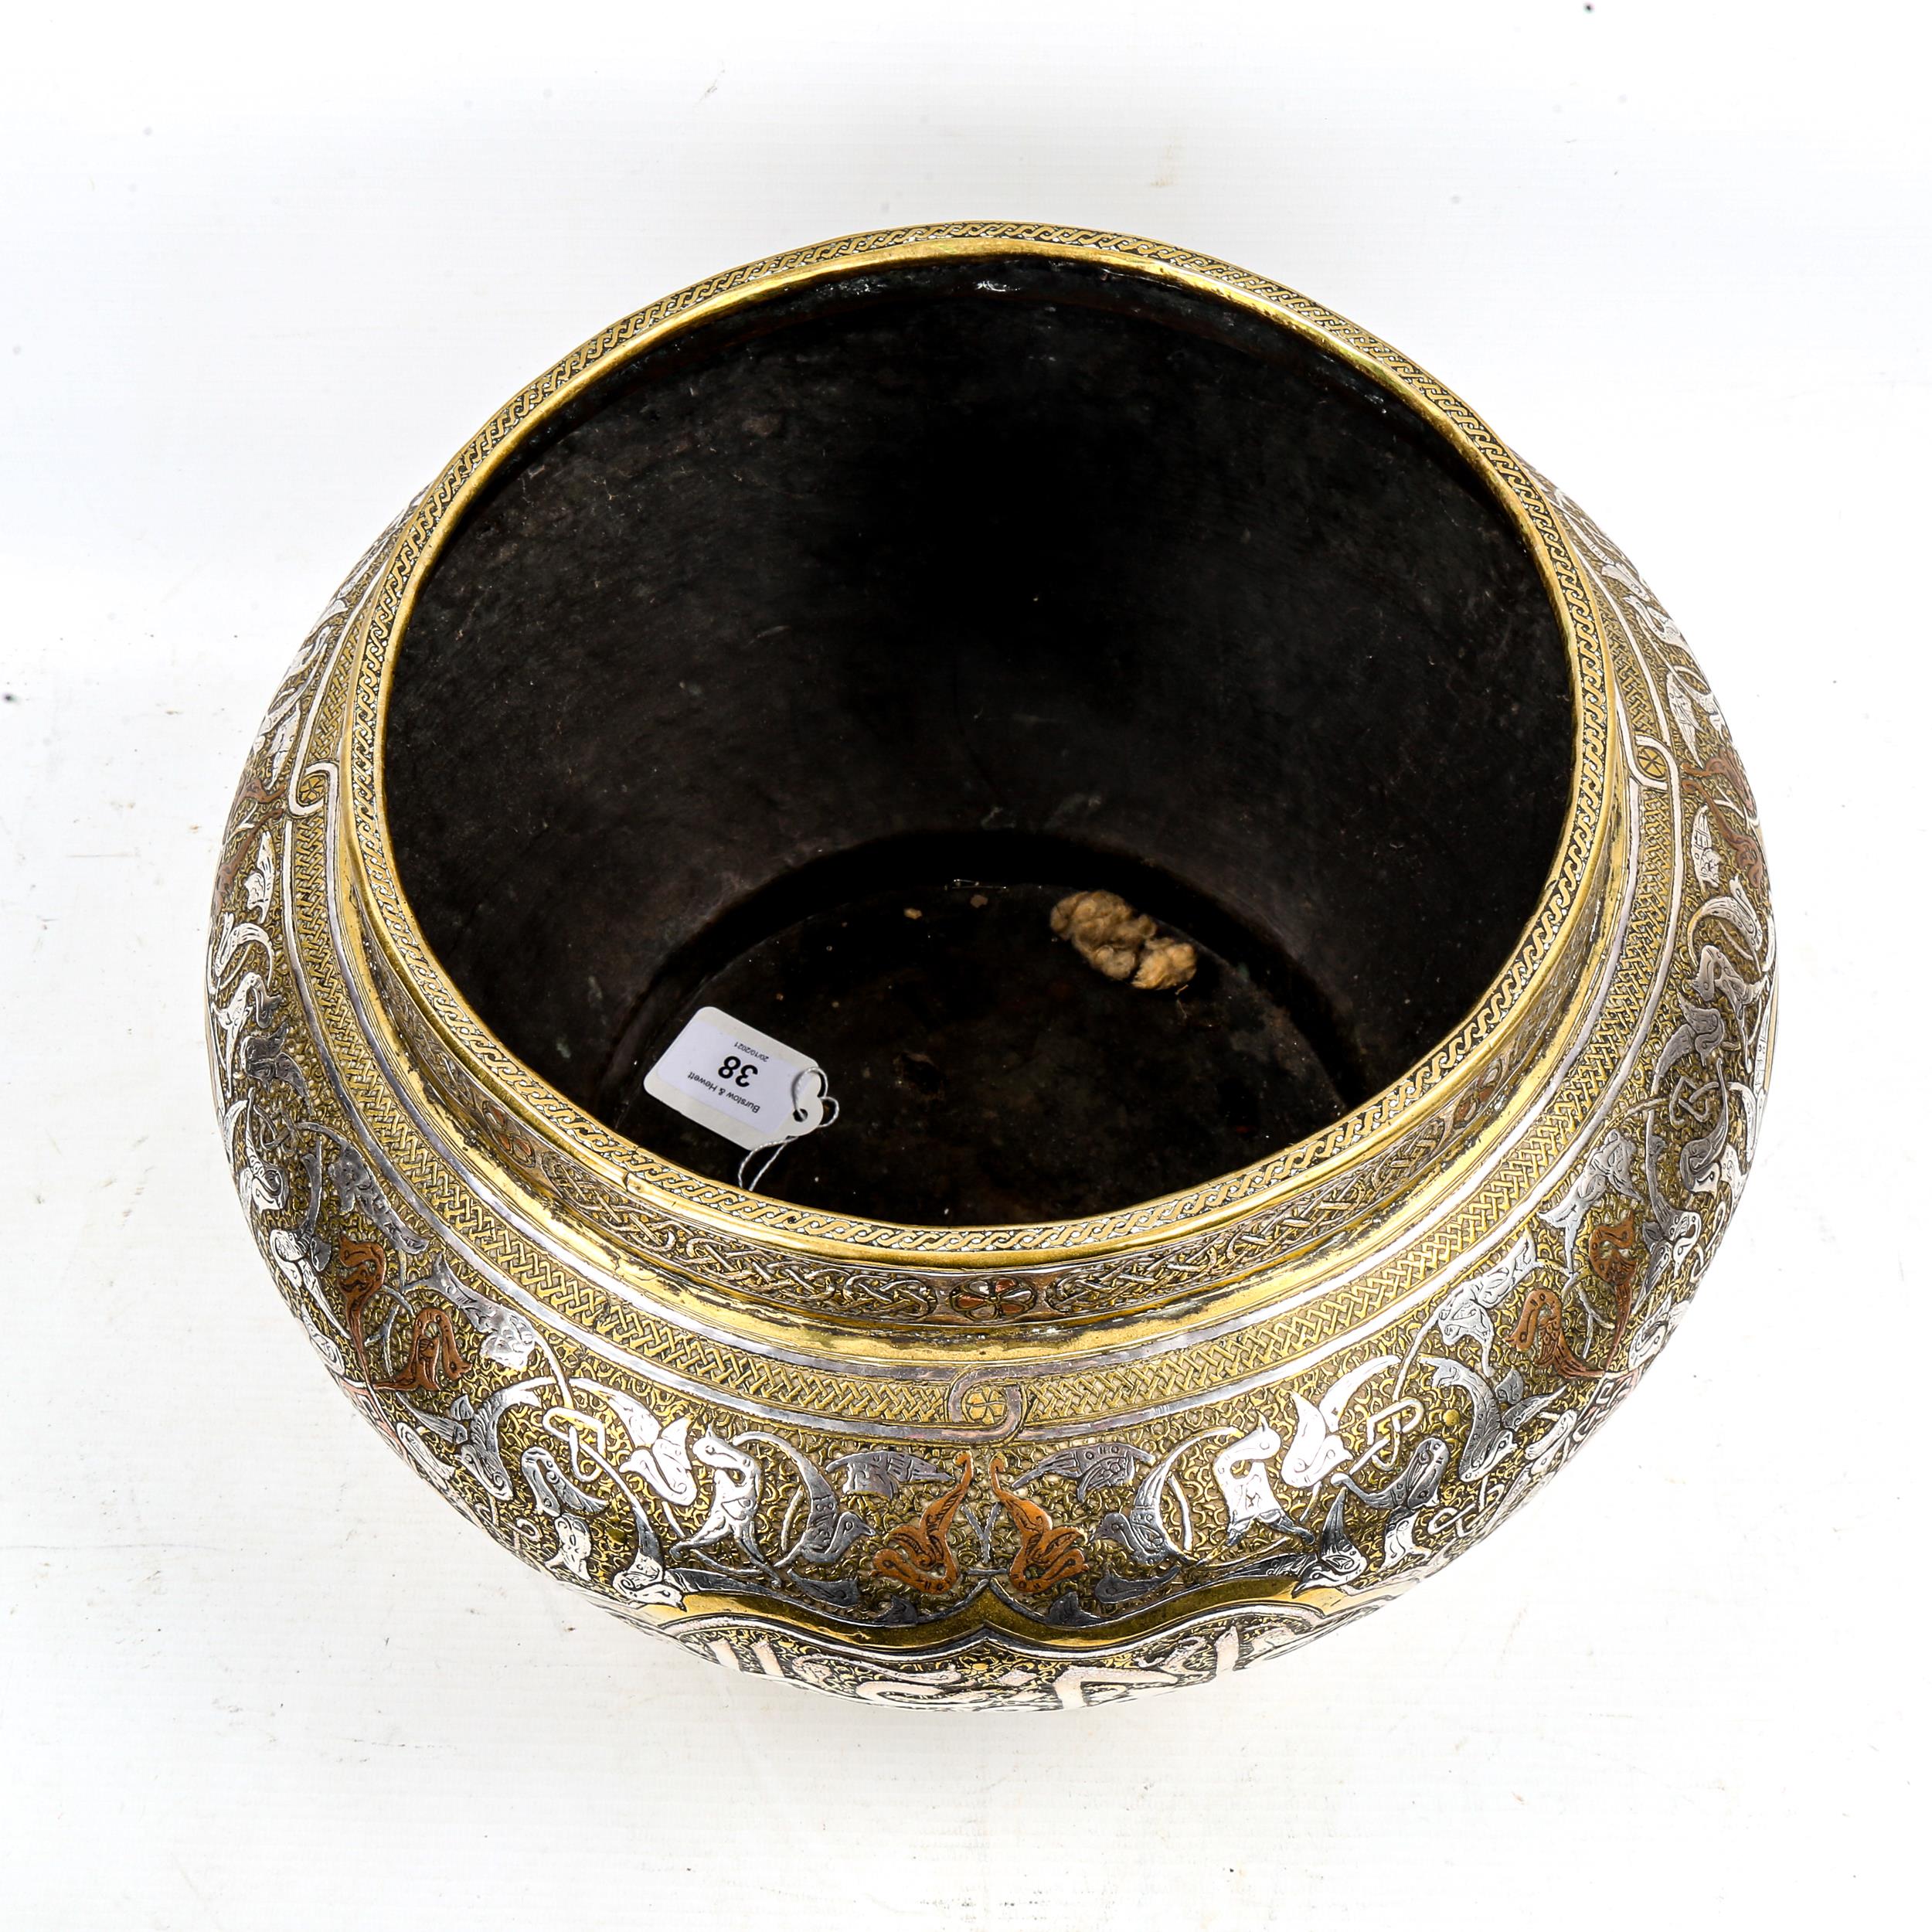 A large Persian brass jardiniere, late 19th century, with intricate inlaid silver and - Image 2 of 3